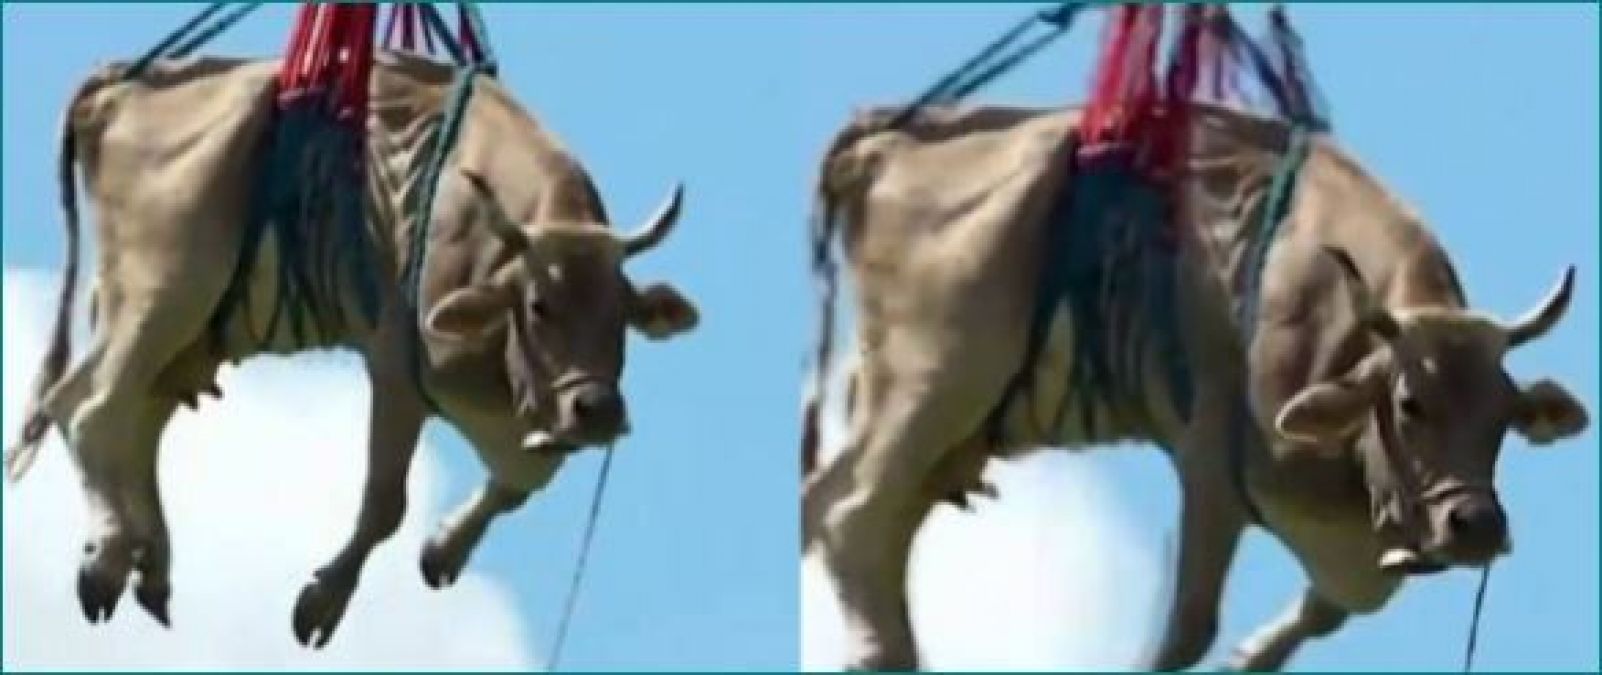 Switzerland: Airlifted cow brought down from mountains